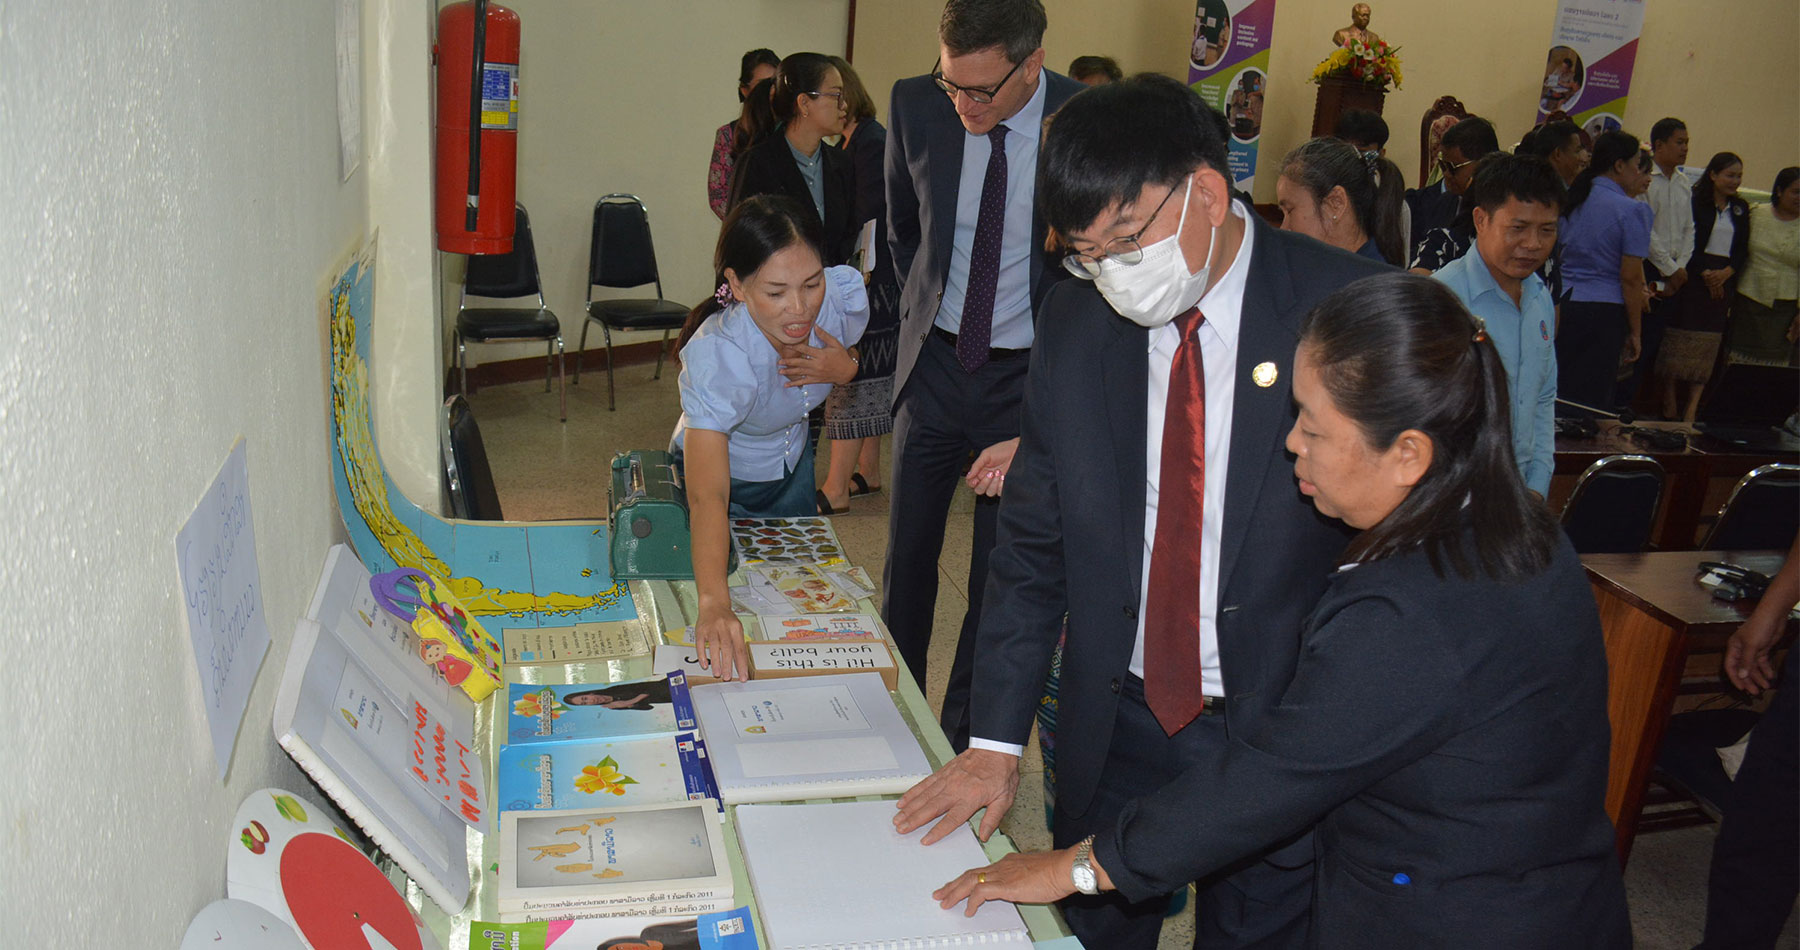 Special school introduced the braille curriculum to the Minister of Education and Sports